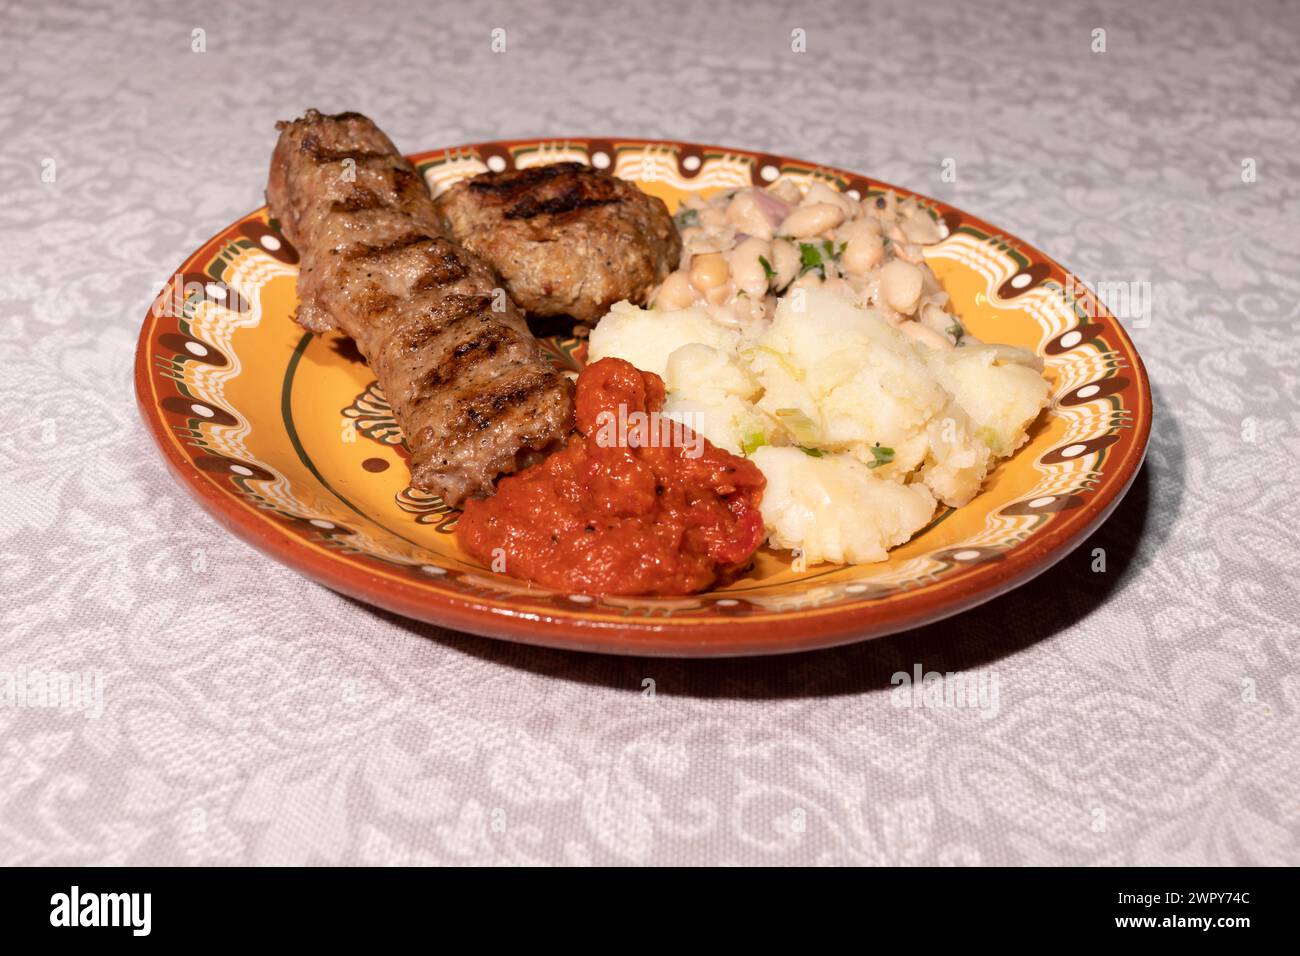 Plate With Traditional Bulgarian Food. Mashed Potato, Vegetable Relish Ljutenica, White Beans, Haricot, Grilled Minced Meat With Spices Kebapche Stock Photo